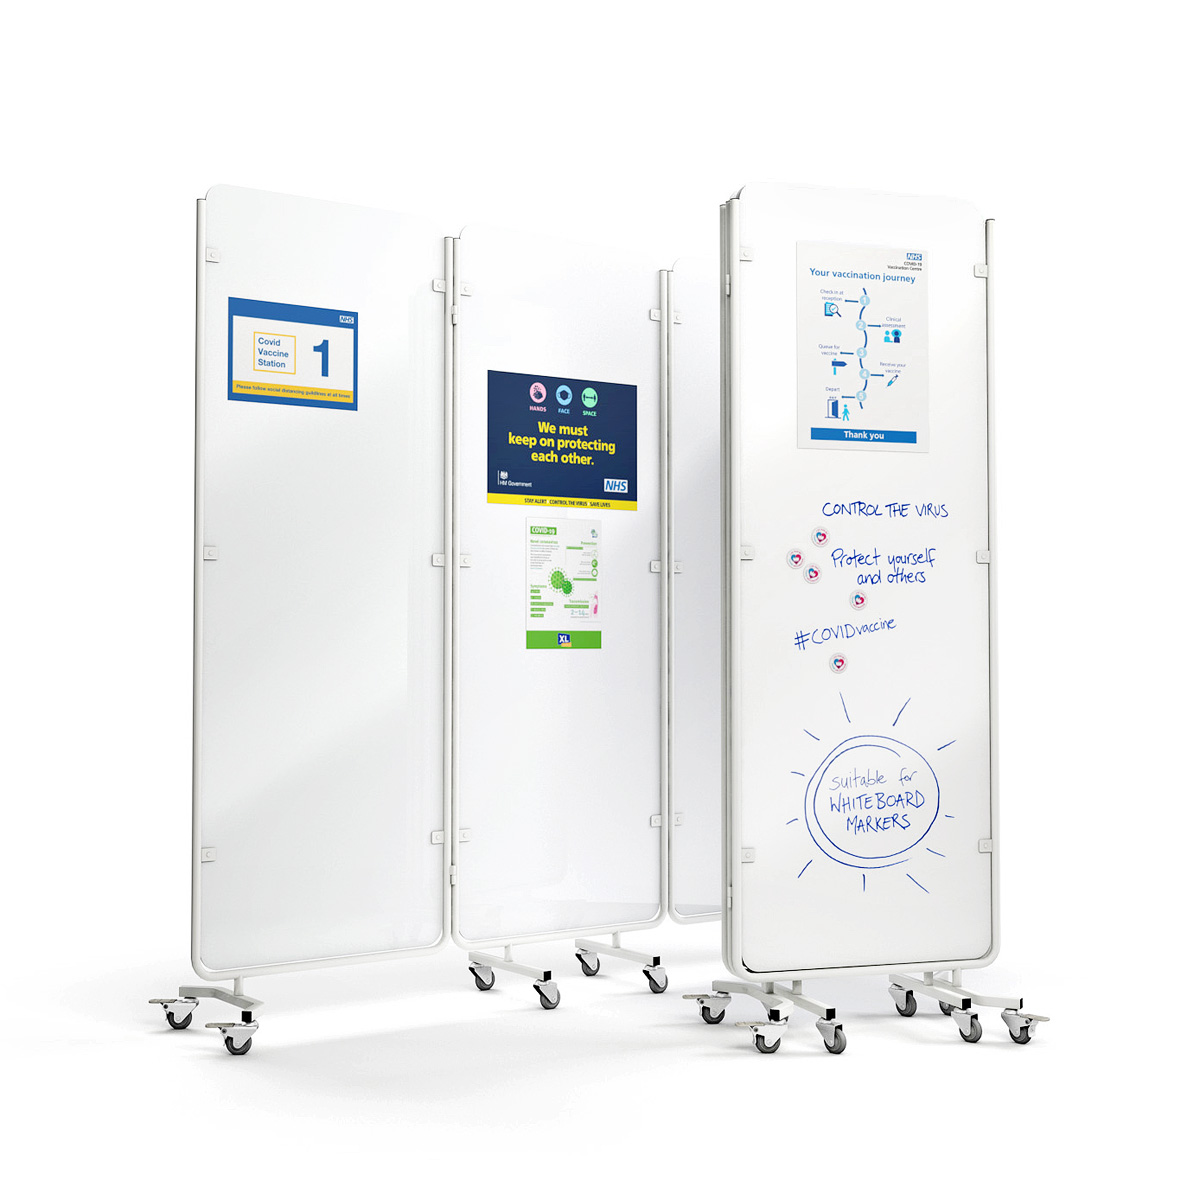 DIGNITY® PLUS Mobile Hospital Medical Screens Can Be Written And Used as a Whiteboard For Writing Patient Notes